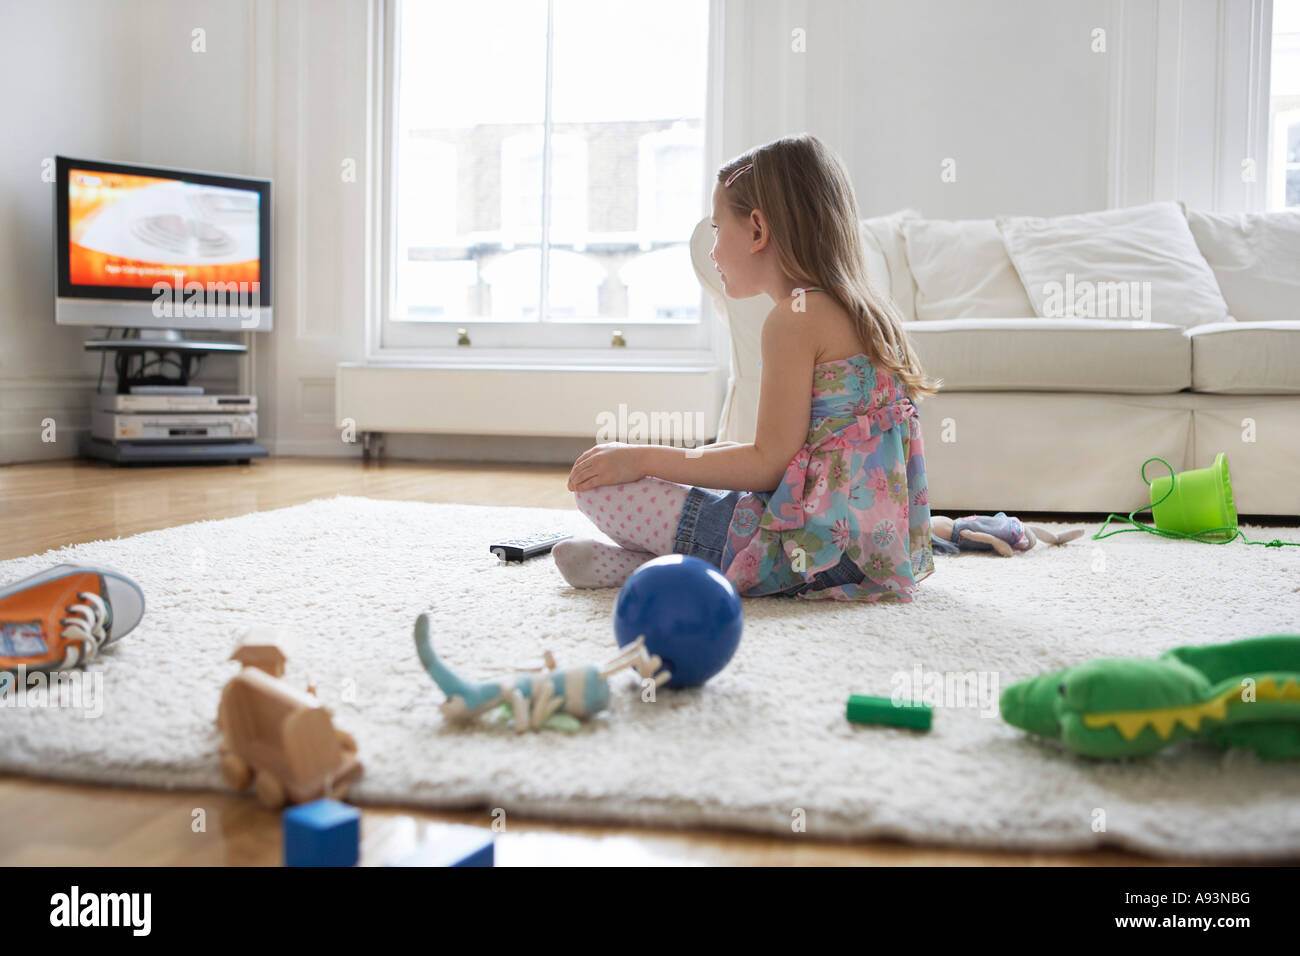 Girl (5-6) sitting on floor surrounded with toys, watching television Stock Photo